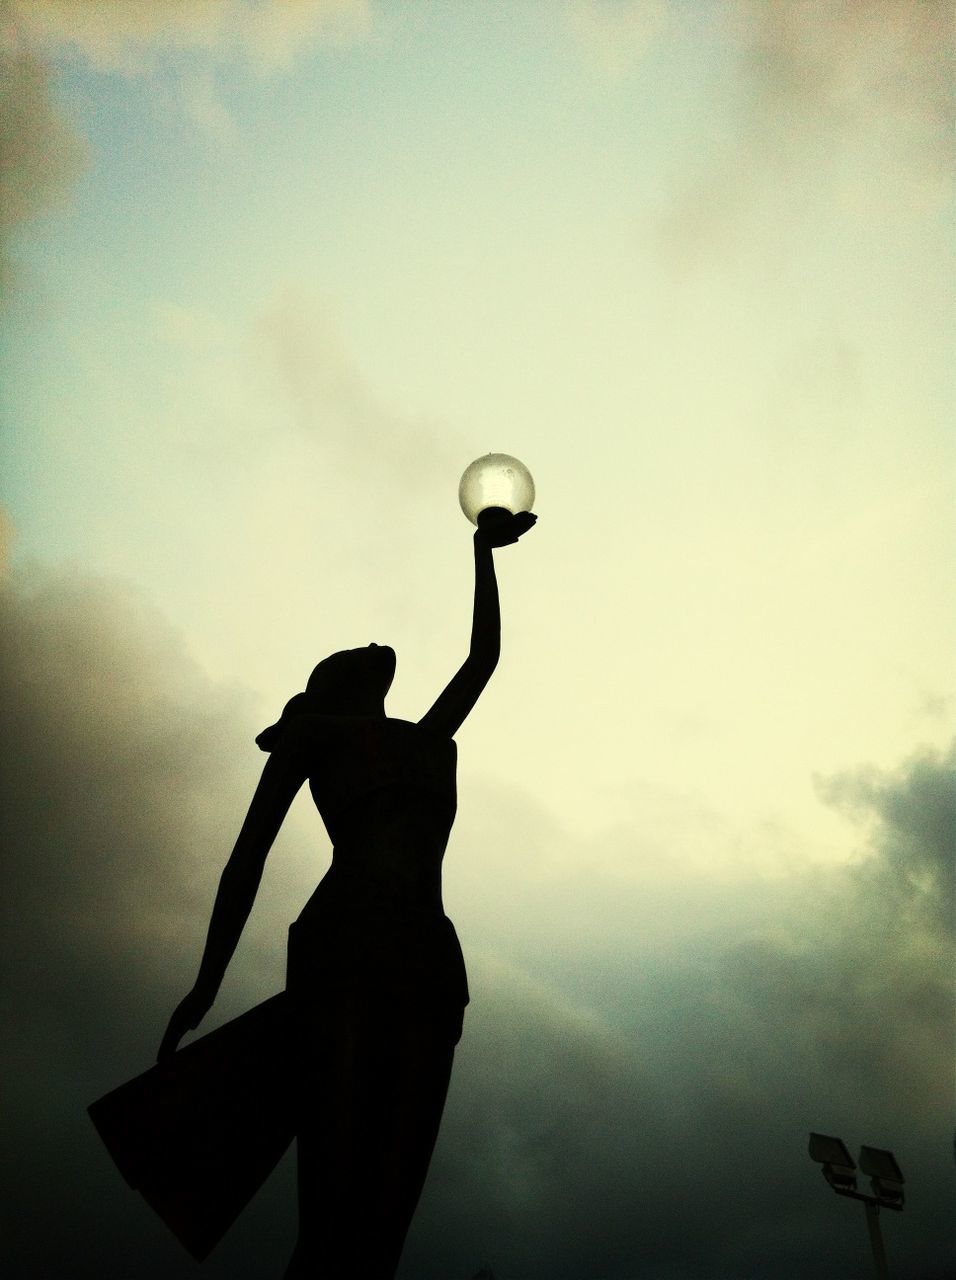 sky, low angle view, cloud - sky, one person, silhouette, cloud, cloudy, human representation, sculpture, outdoors, dusk, statue, art and craft, part of, holding, street light, day, creativity, person